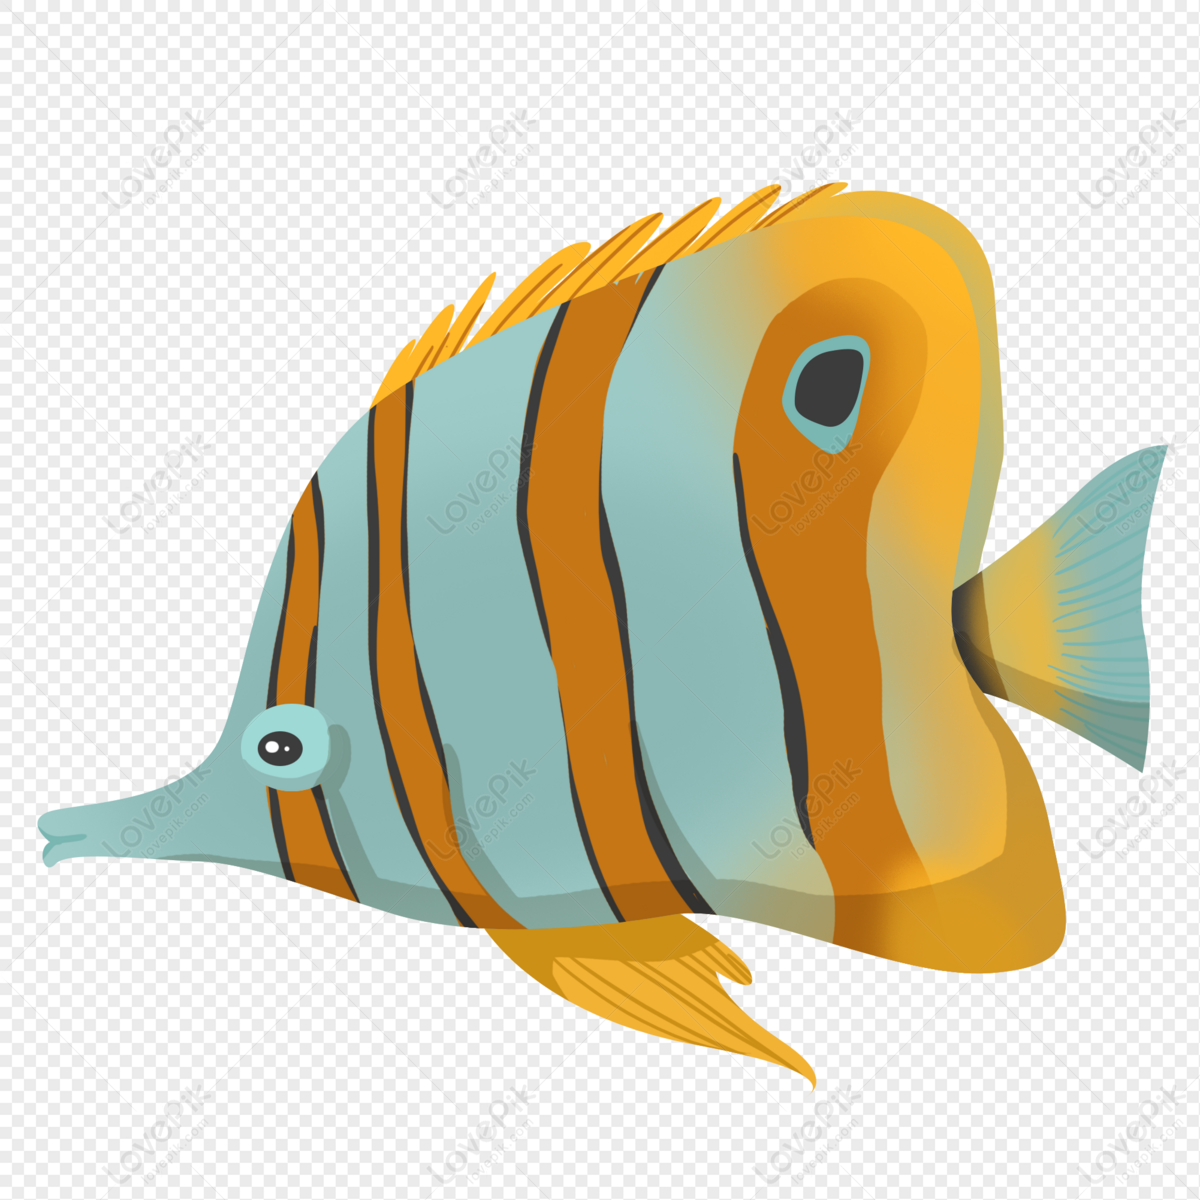 Hand Drawn Cartoon Colorful Sea Fish Free PNG And Clipart Image For Free  Download - Lovepik | 401259469